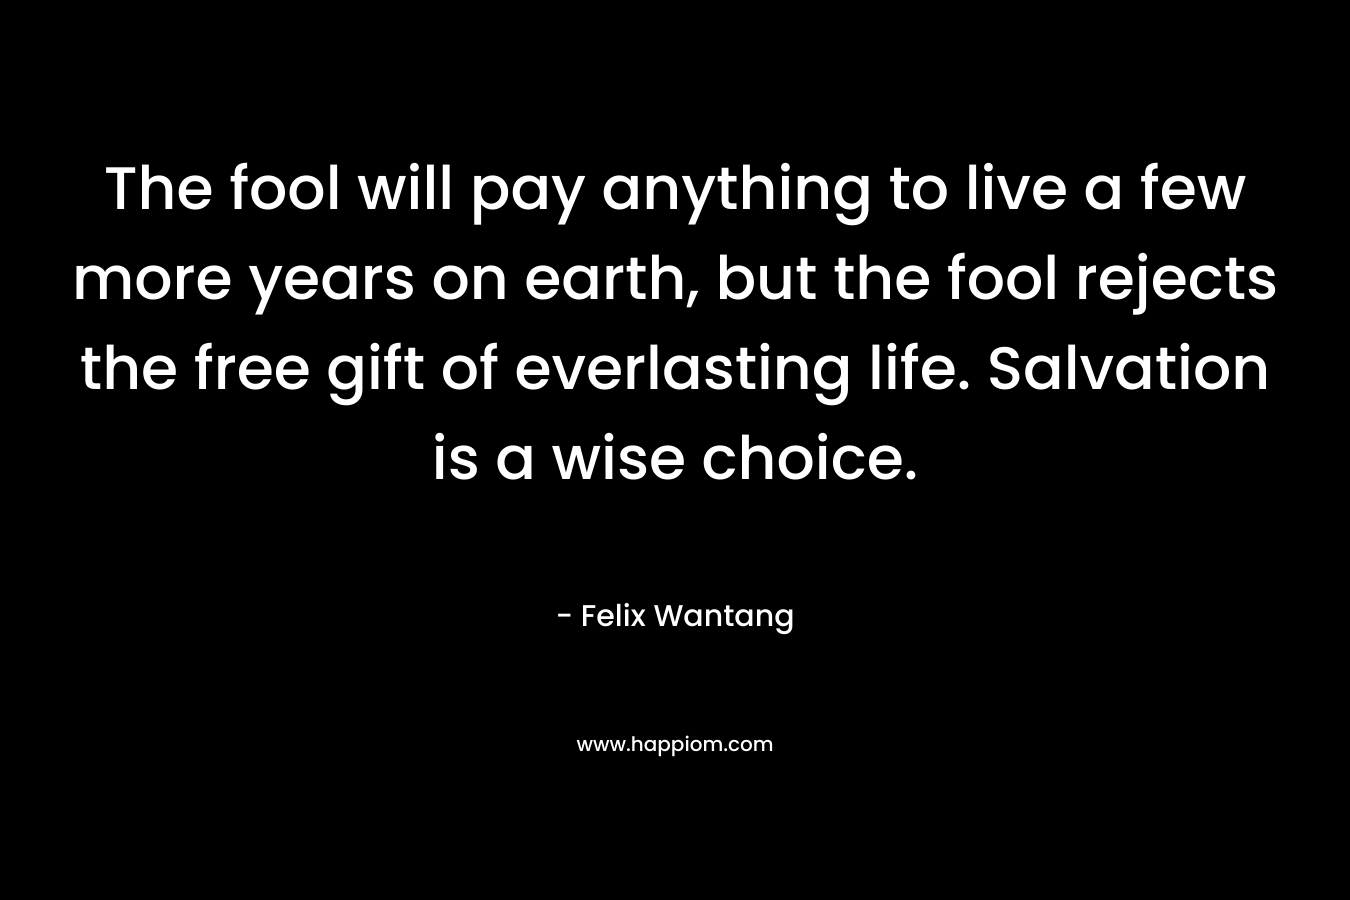 The fool will pay anything to live a few more years on earth, but the fool rejects the free gift of everlasting life. Salvation is a wise choice.